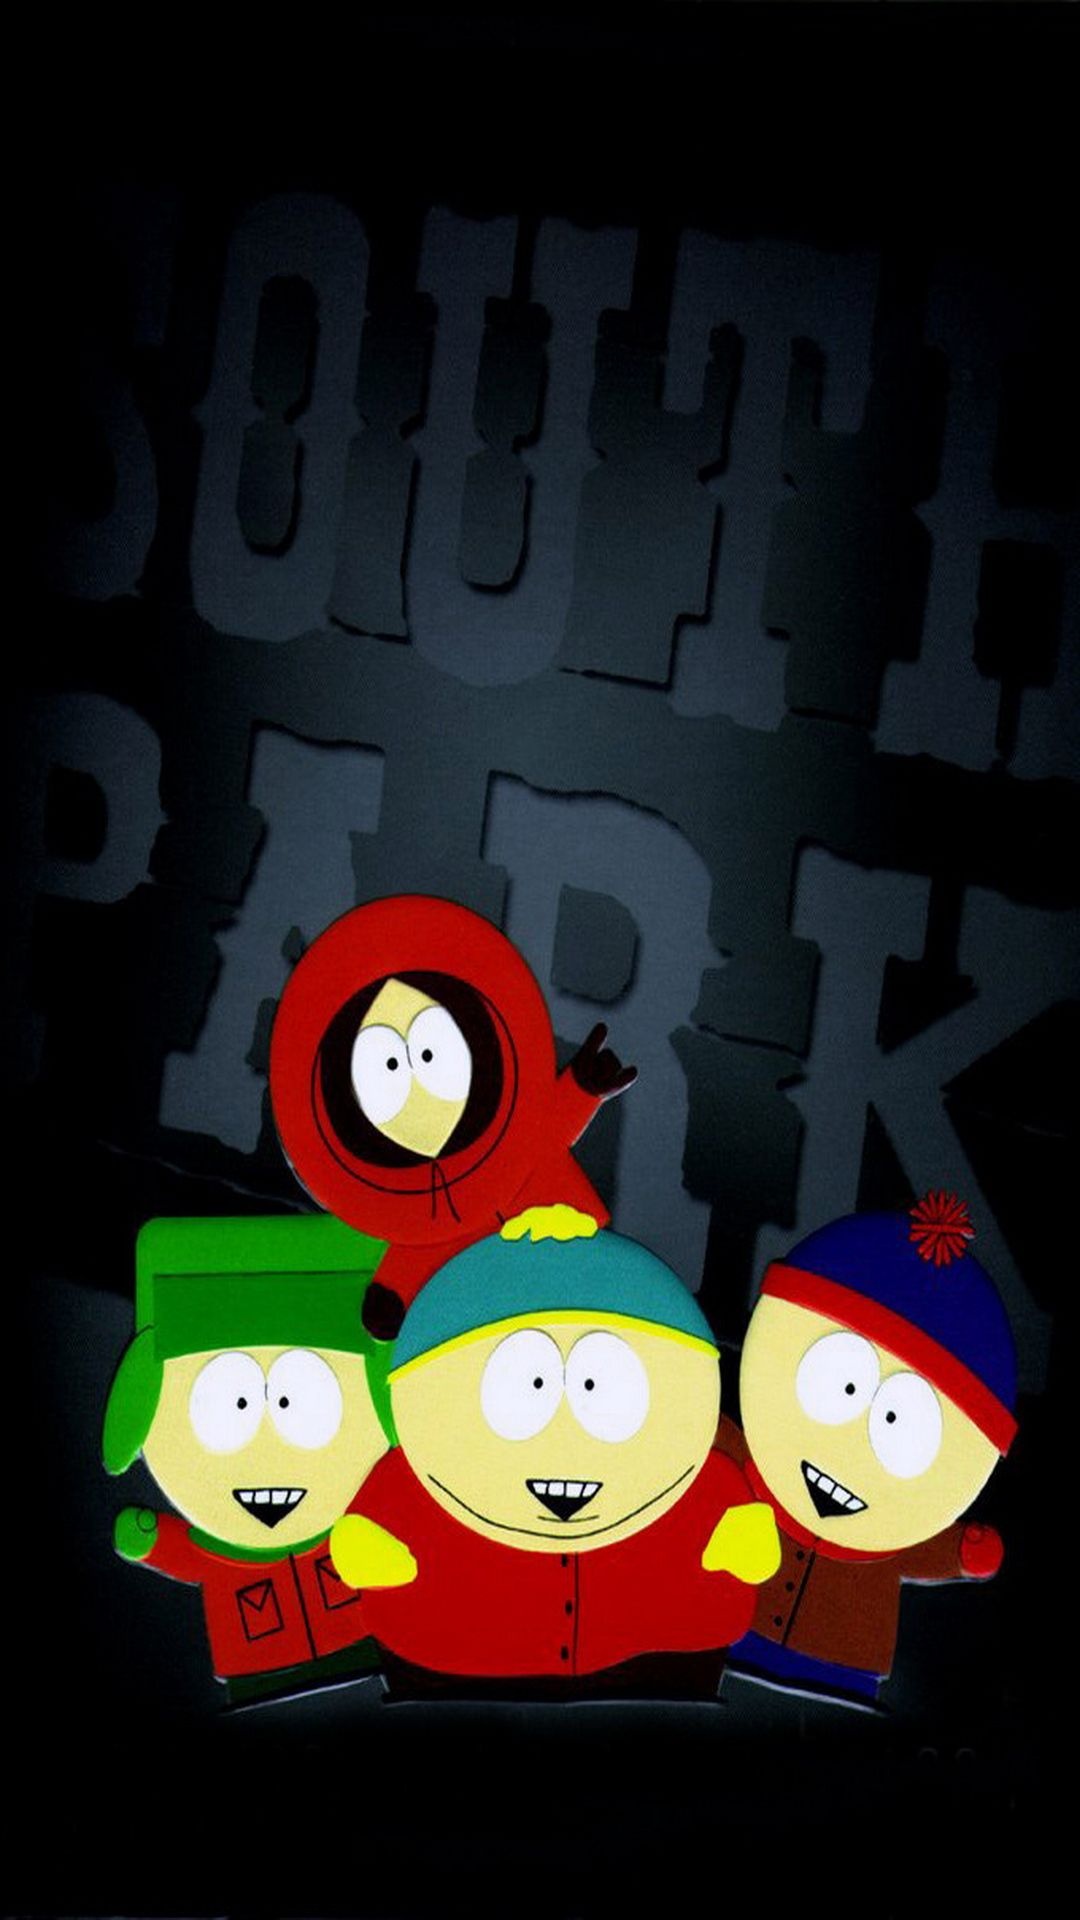 South Park Supreme wallpapers, Trendy designs, Streetwear inspiration, 1080x1920 Full HD Phone